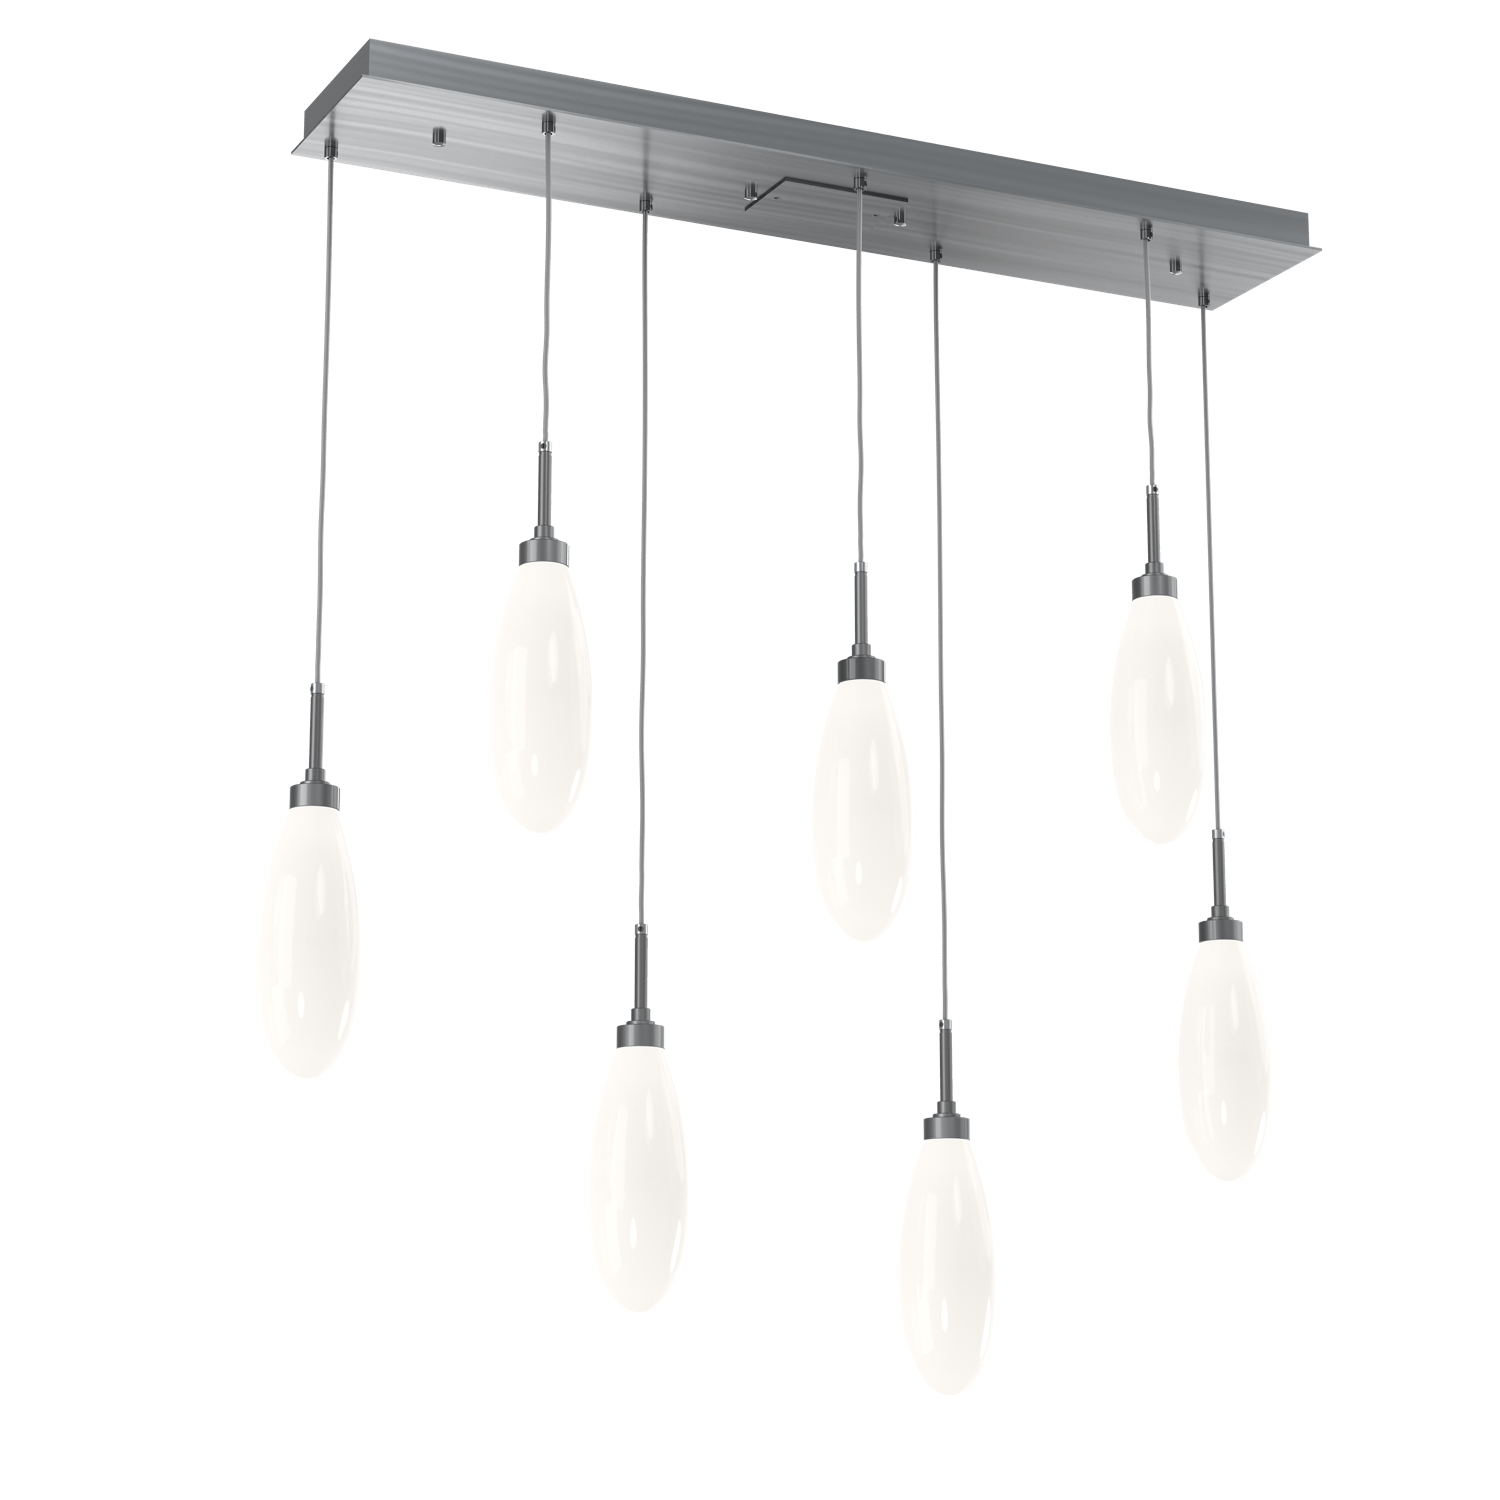 PLB0071-07-GM-WL-LL-Hammerton-Studio-Fiori-7-light-linear-pendant-chandelier-with-gunmetal-finish-and-opal-white-glass-shades-and-LED-lamping